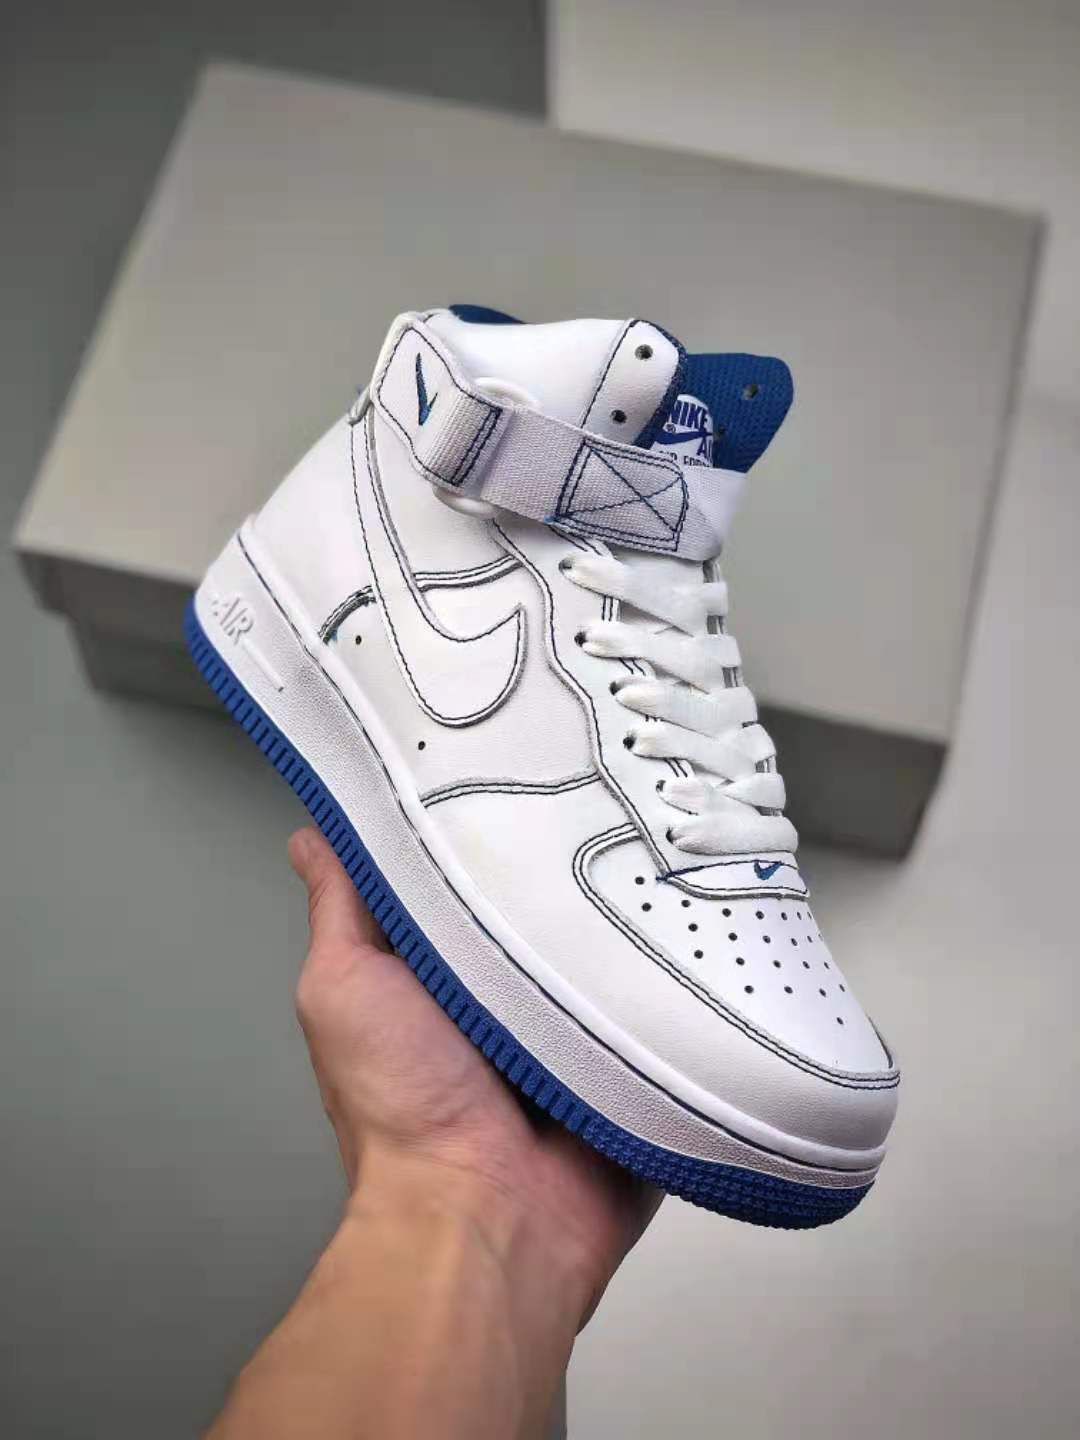 Nike Air Force 1 High White Royal Blue Contrast Stitch CV1753-101 - Classic Style and Superior Quality